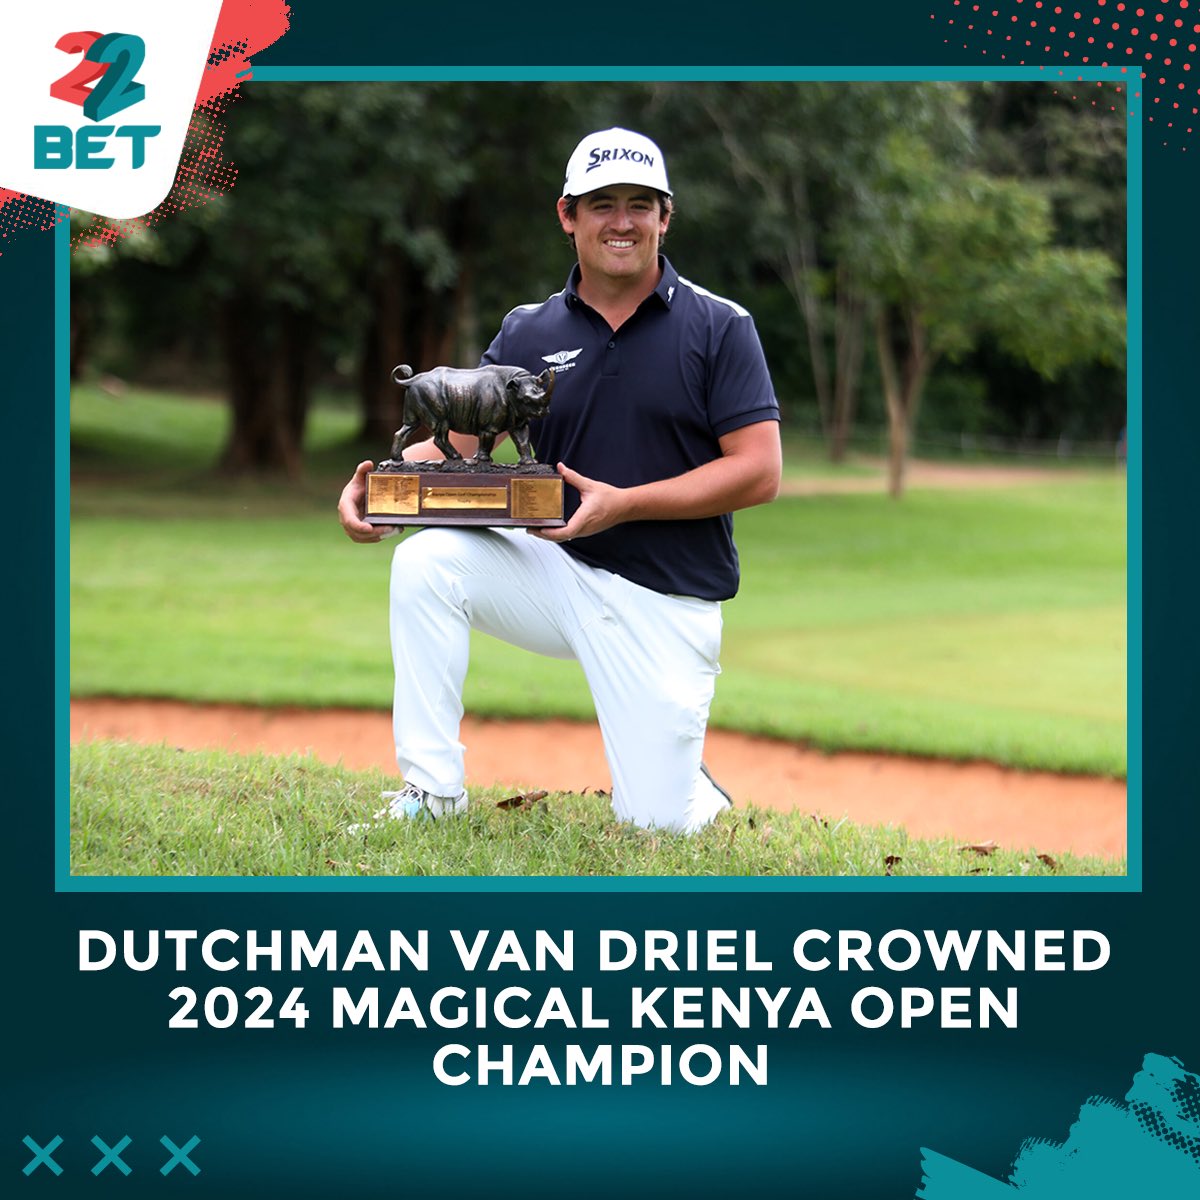 'Darius Van Driel, the 2024 DP World Tour Magical Kenya Open champion! 🏆 Leading from Day One, he finished strong with a total of 14 under par. 🙌🏼⛳ #MagicalKenyaOpen #Champion'